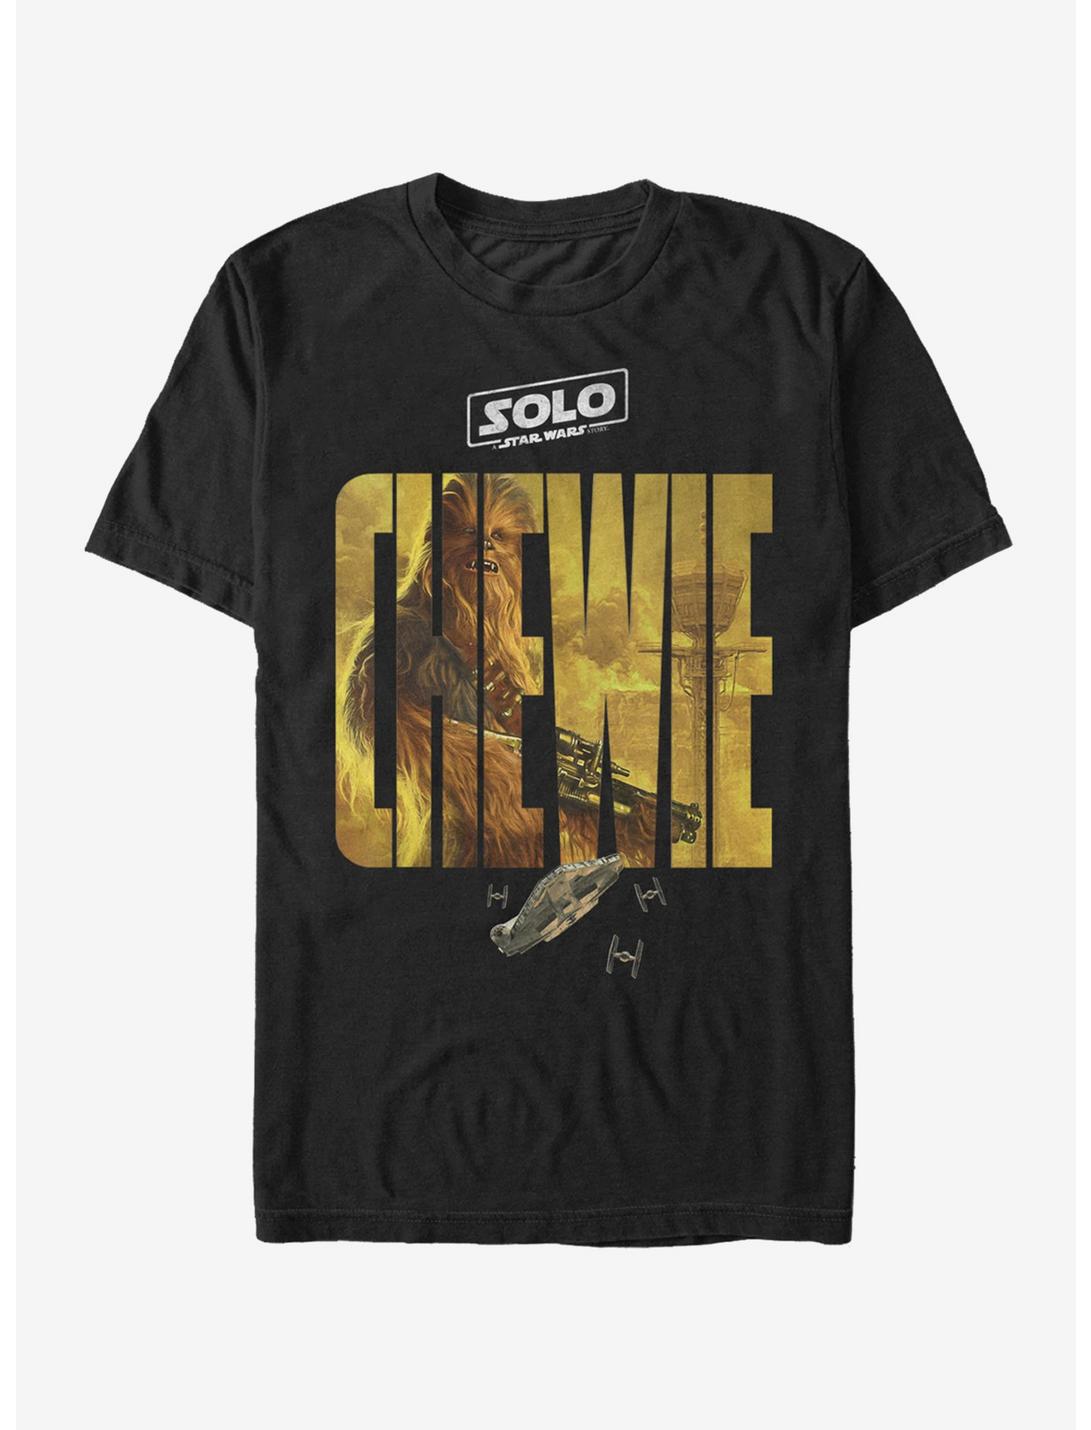 Plus Size Star Wars Solo A Star Wars Story Chewie Poster T-Shirt, BLACK, hi-res